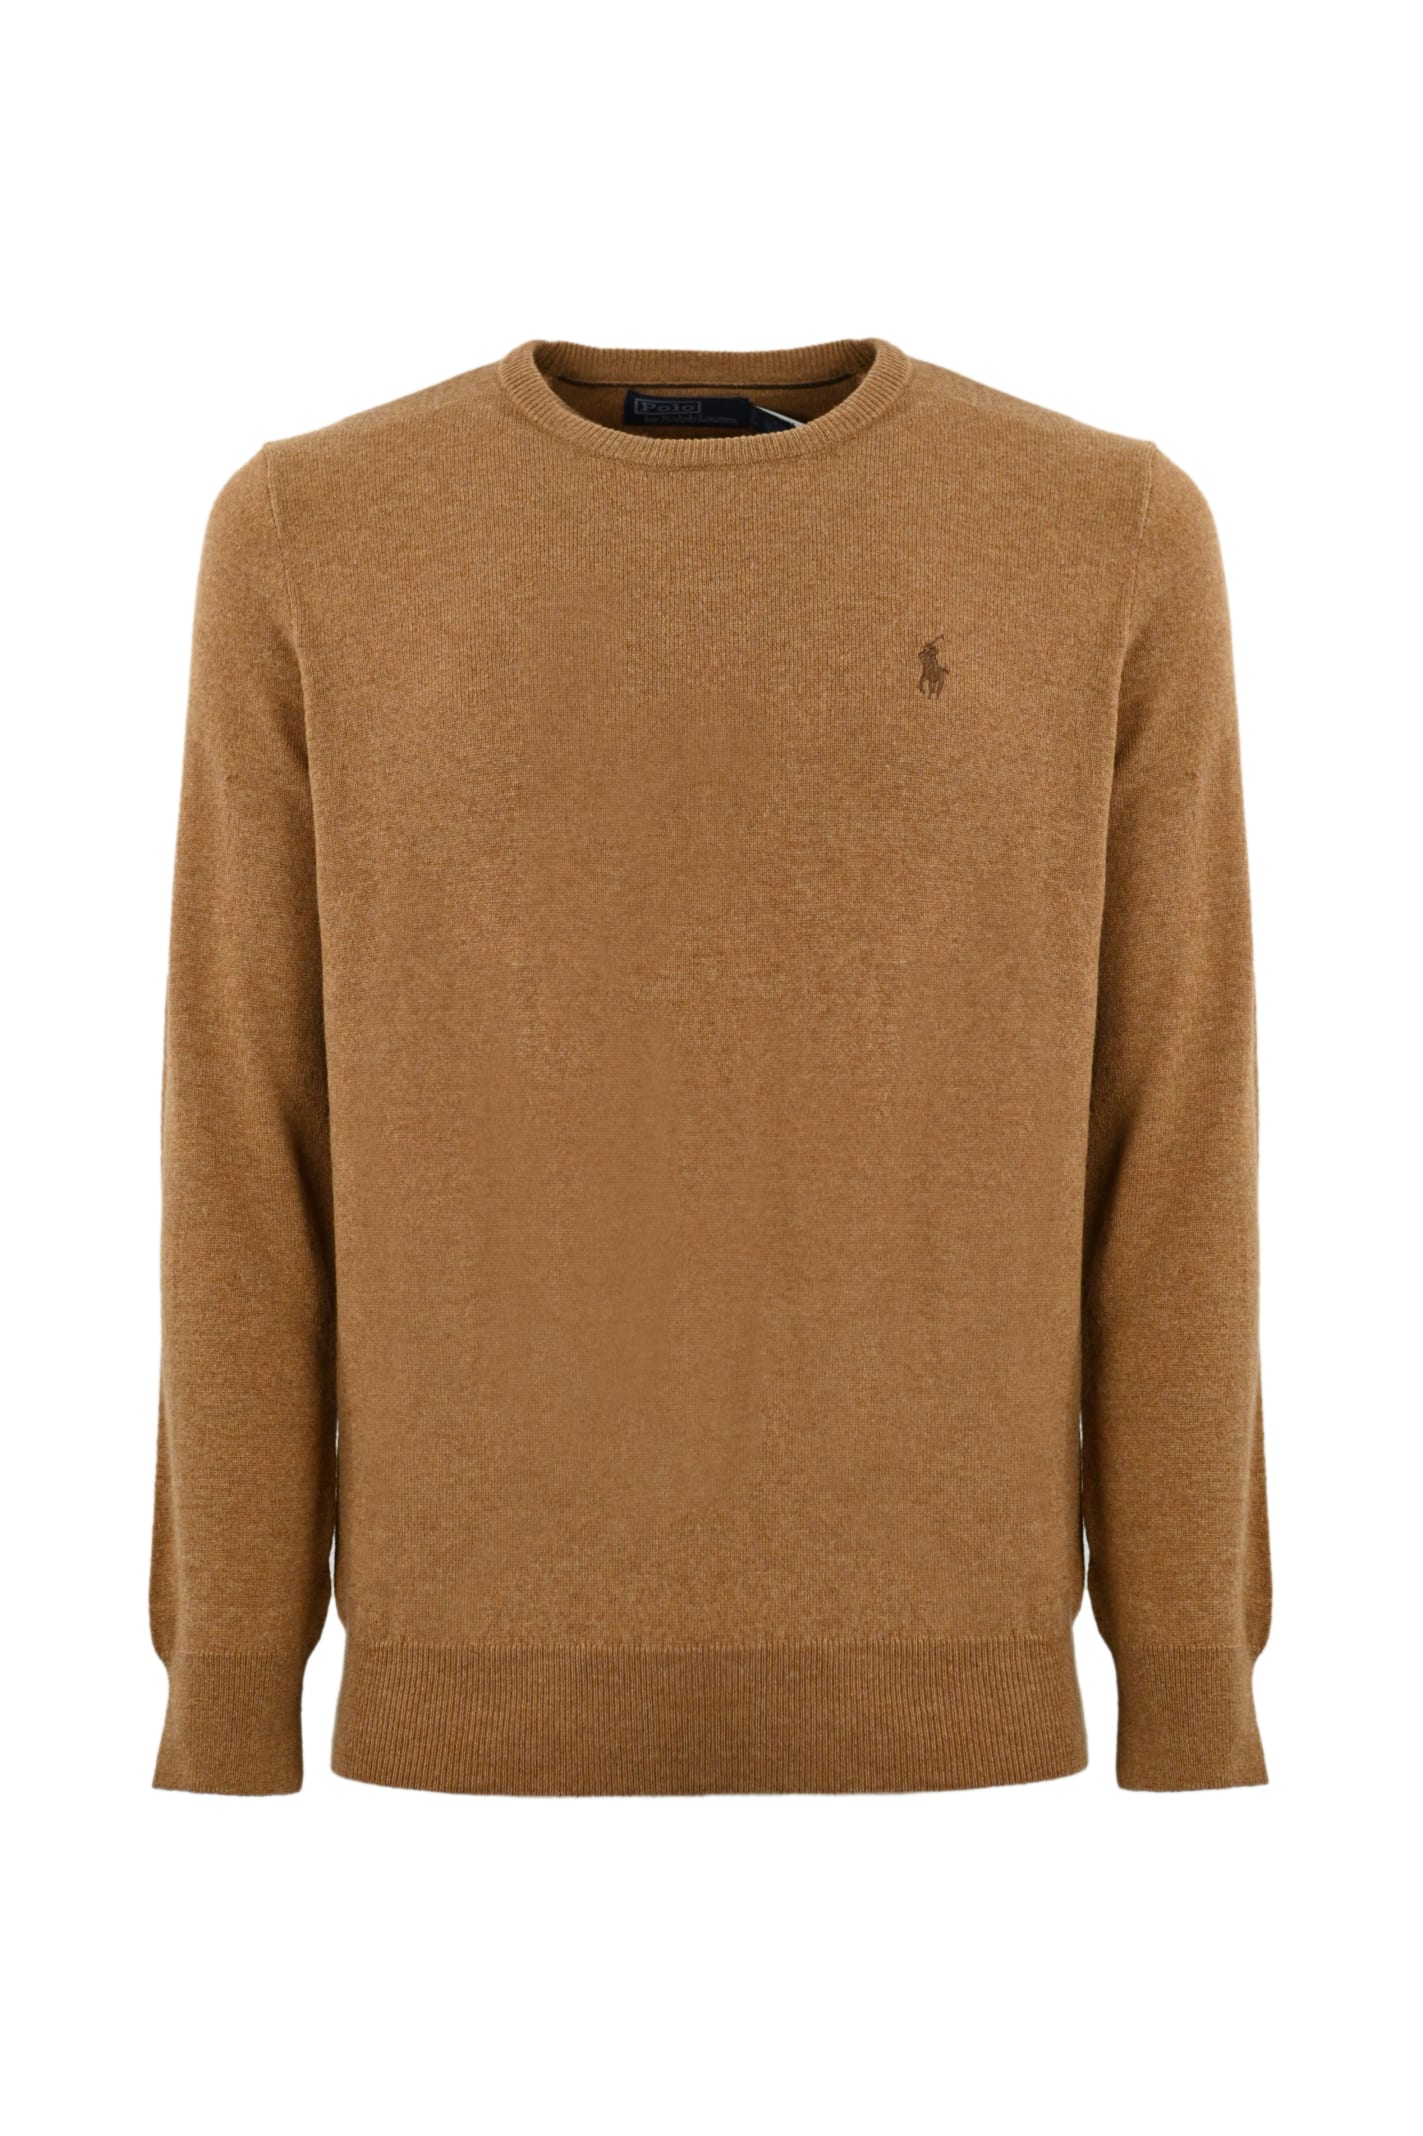 POLO RALPH LAUREN WOOL SWEATER WITH PONY